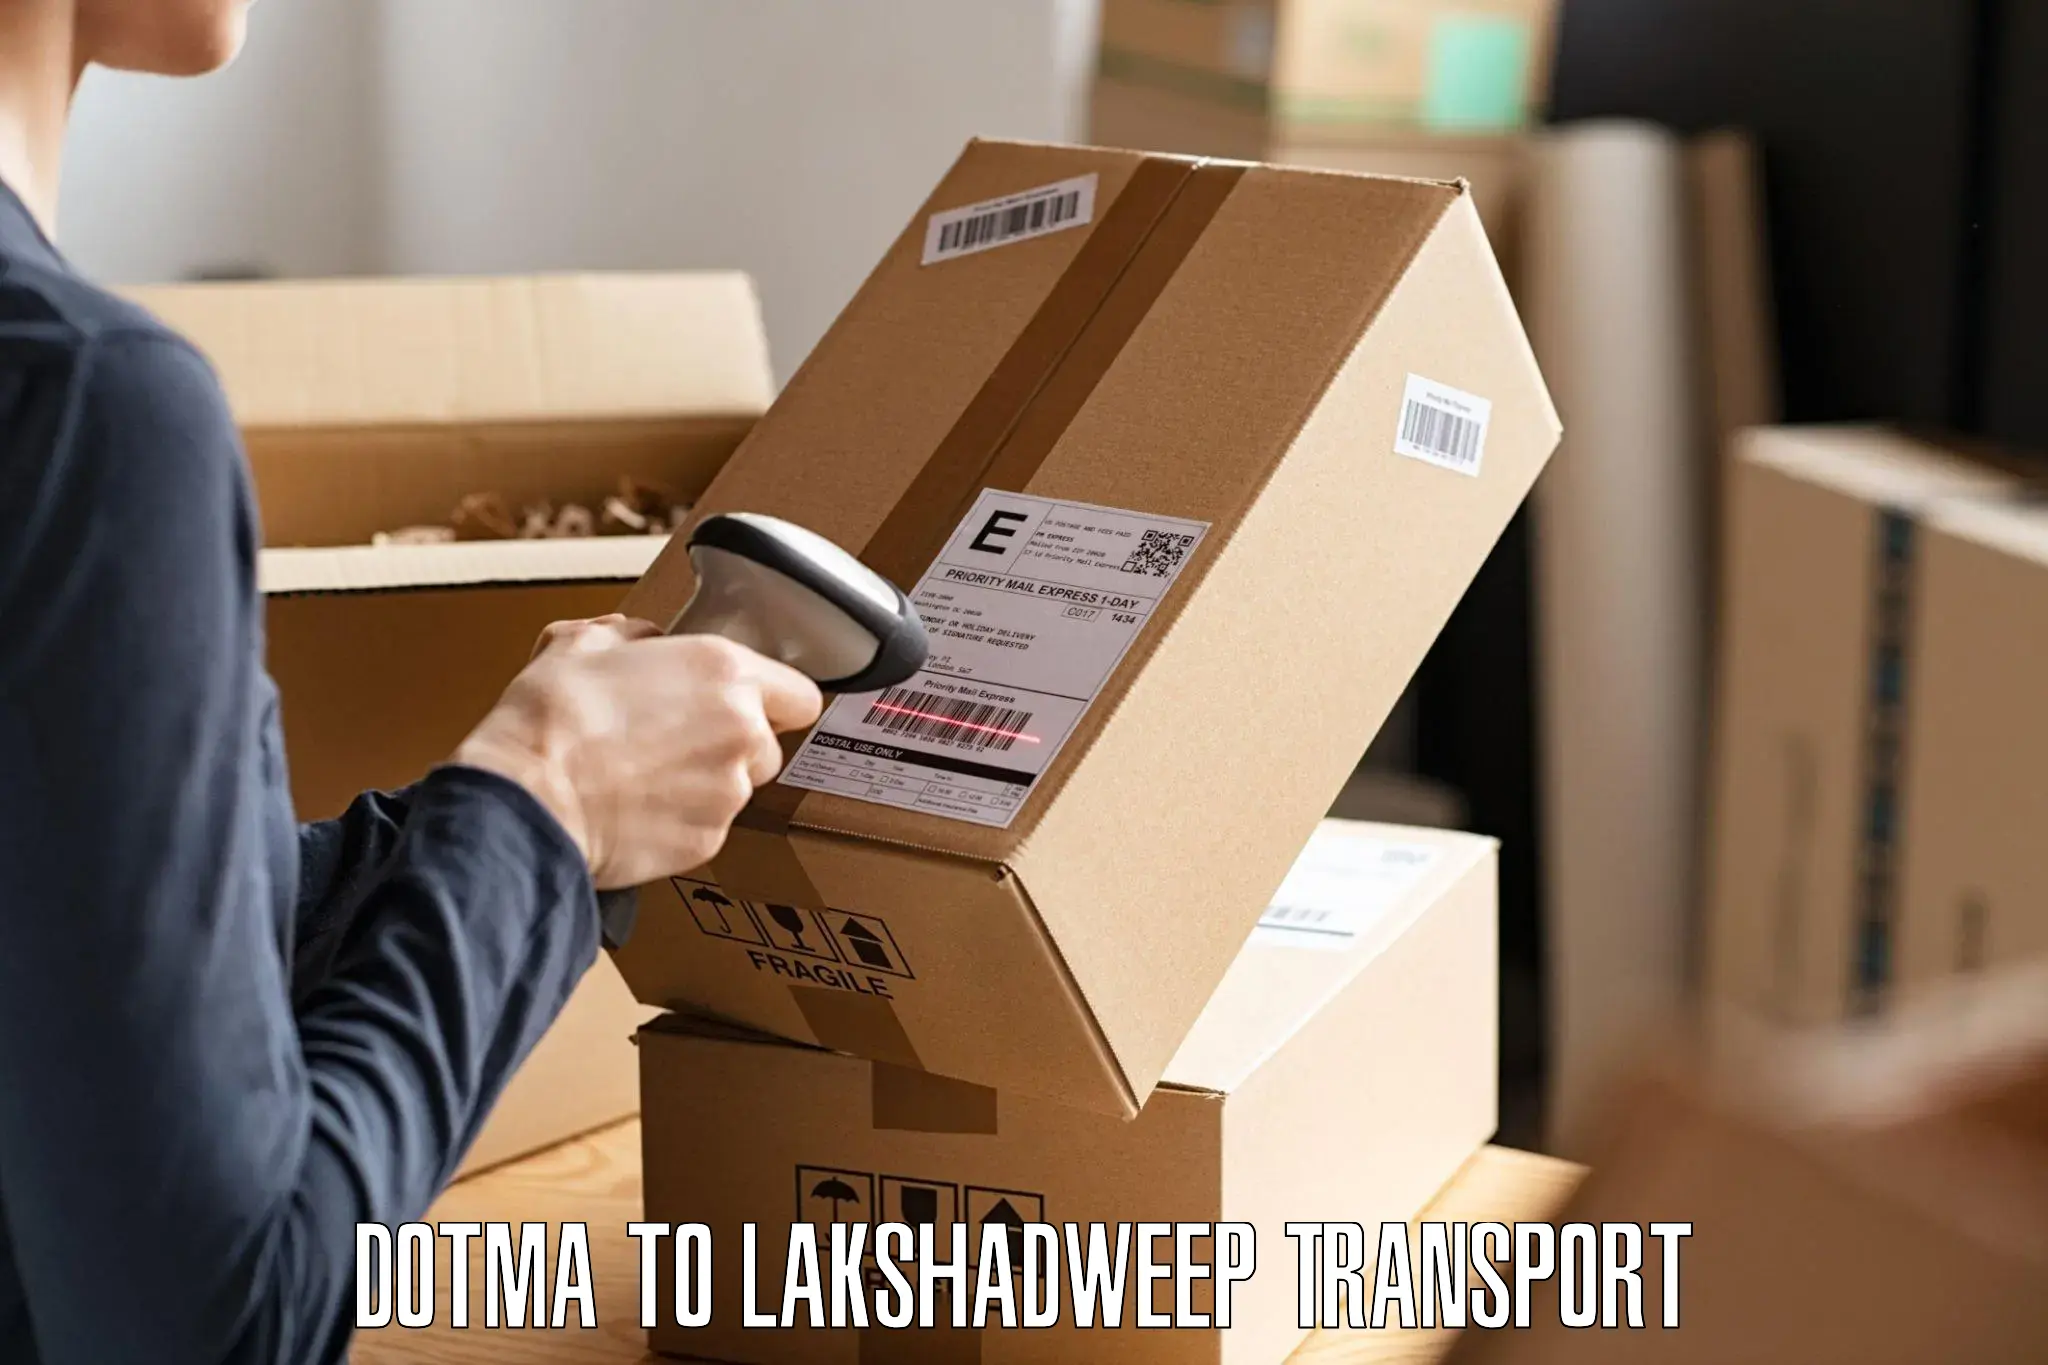 Domestic transport services Dotma to Lakshadweep